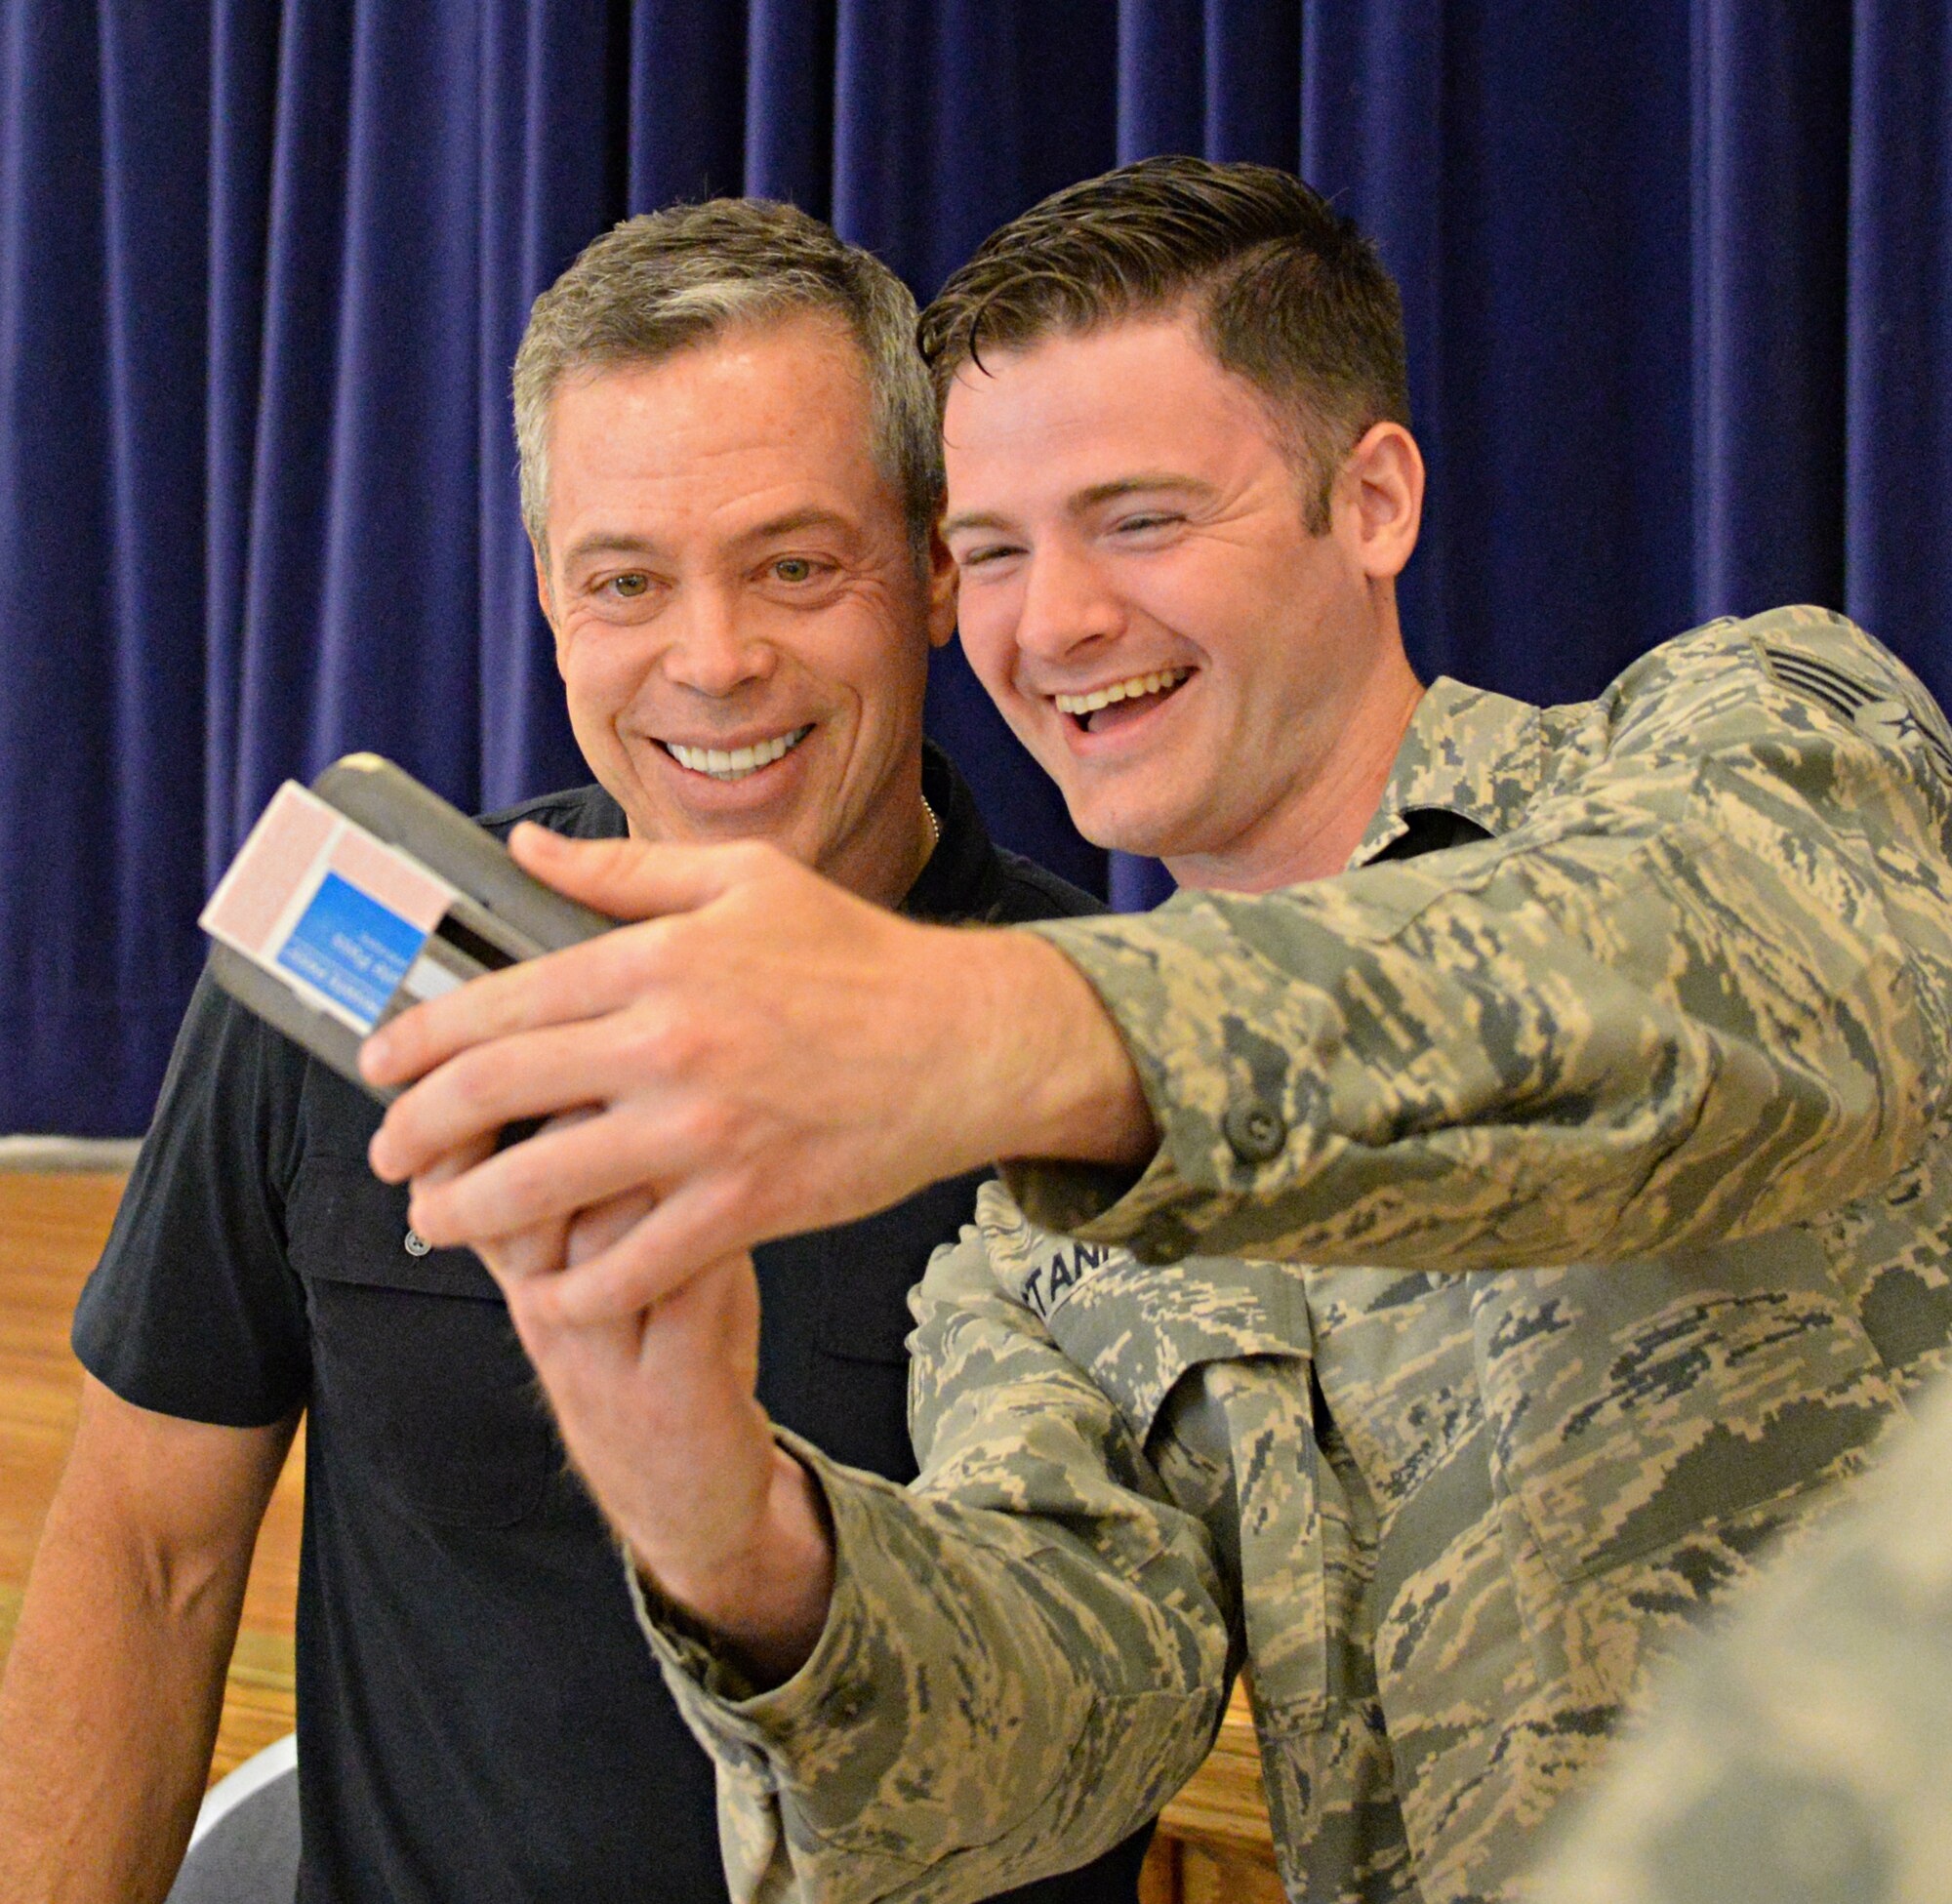 Comedian Bernie McGrenahan takes a photo with a Beale Airman after his performance, “Comedy with a Message,” June 12, 2015, at Beale Air Force Base, California. McGrenahan began his comedy tour in 1995 to promote resiliency, safety, bystander intervention and respect. He also shares his experiences overcoming addiction. (U.S. Air Force photo by Airman 1st Class Ramon A. Adelan/Released)